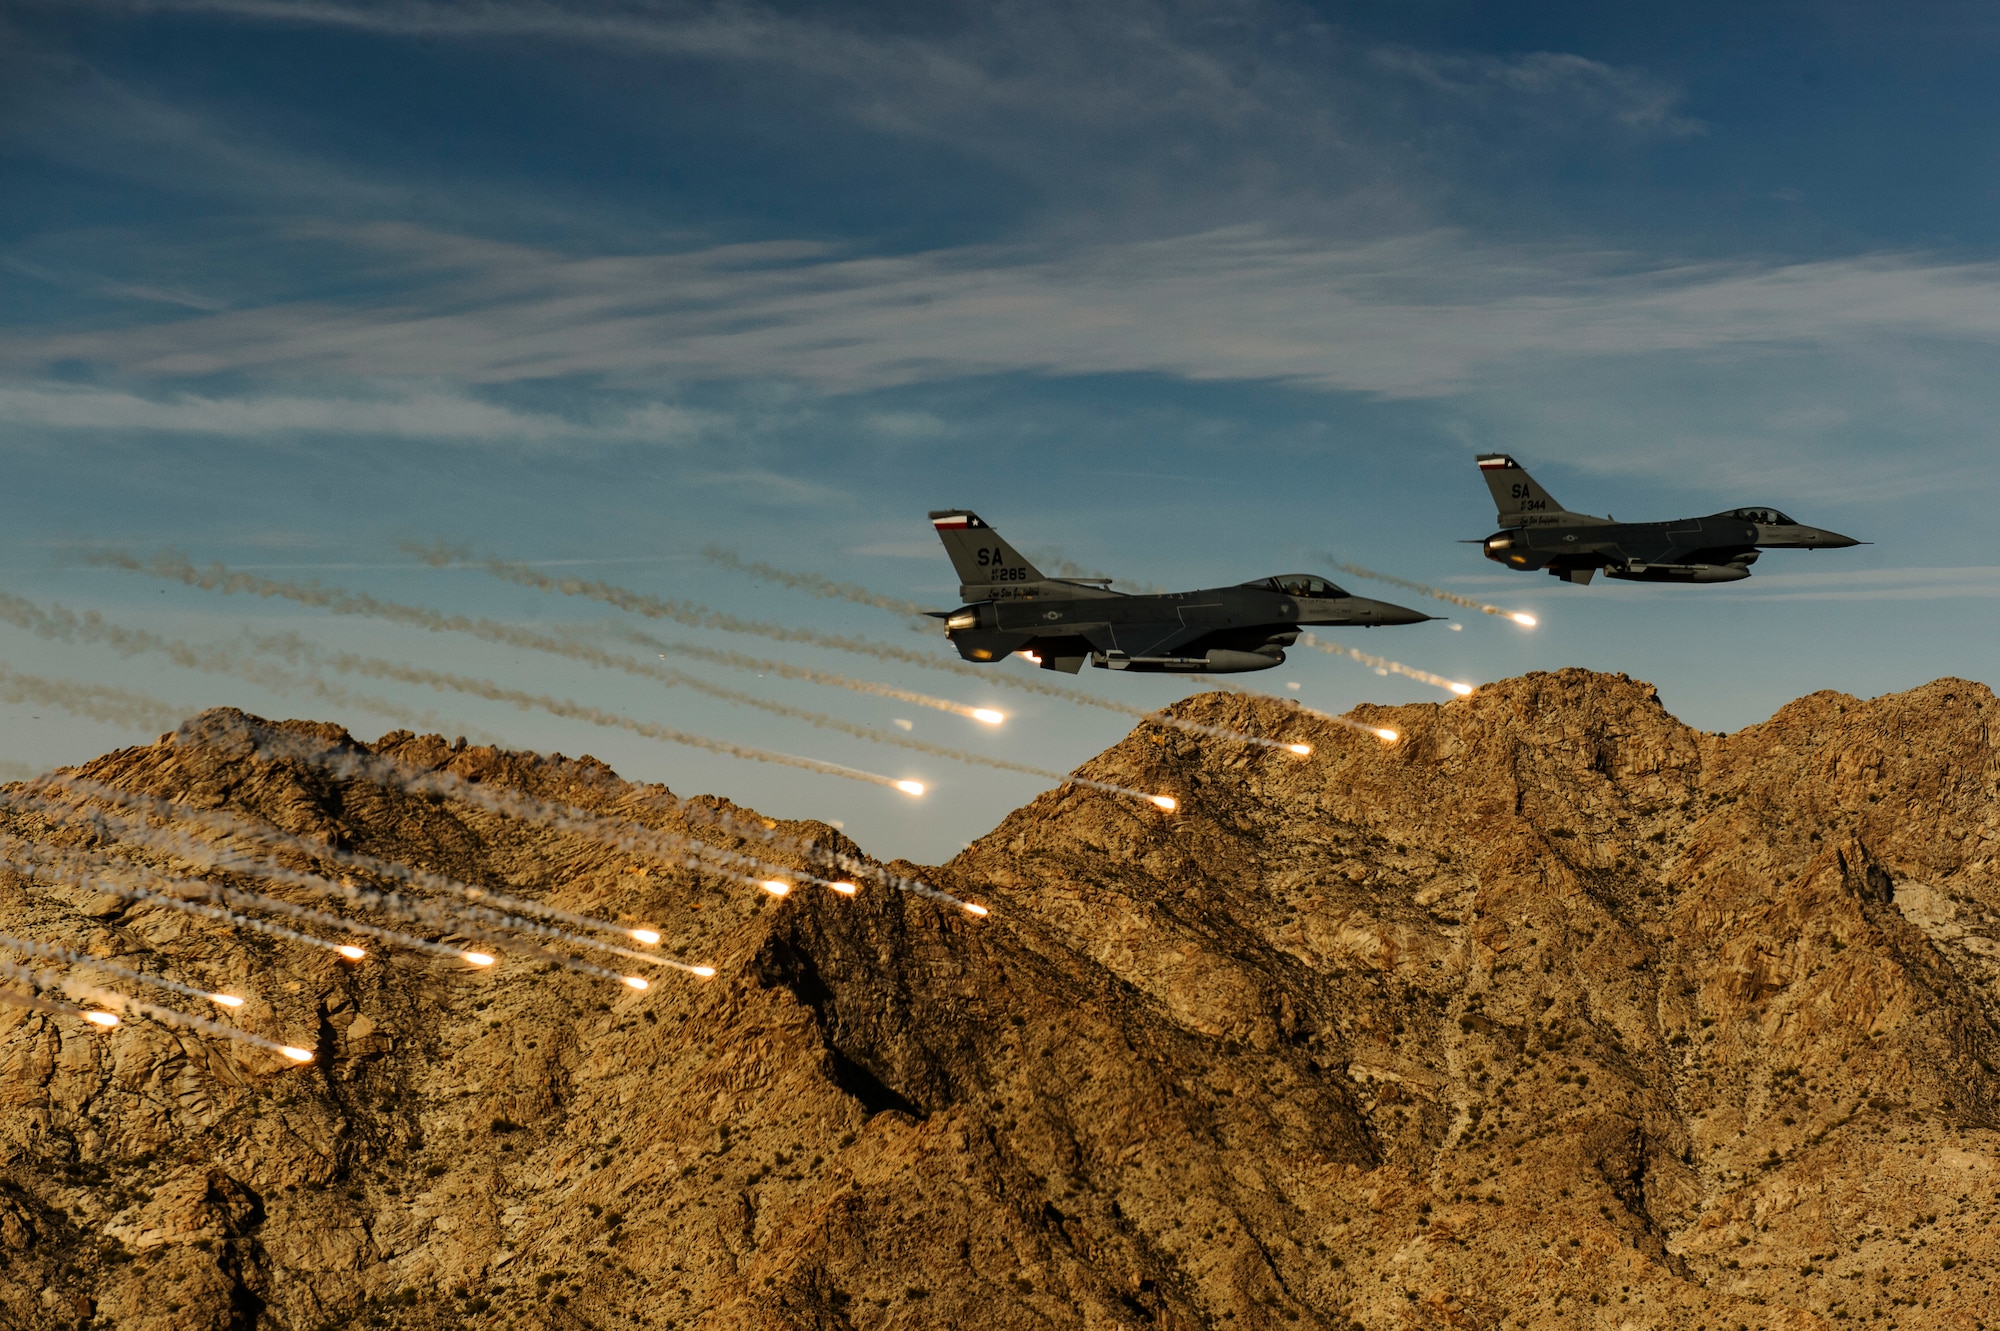 Two F-16C Fighting Falcons release flares while conducting low-level combat training during the Coronet Cactus exercise near Davis-Monthan Air Force Base, Ariz. The F-16s are assigned to the , assigned to the 182nd Fighter Squadron. This exercise provides realistic combat training for student fighter pilots from air-to-air combat to dropping inert and live ordnance. (U.S. Air Force photo/Staff Sgt. Jonathan Snyder/3rd Combat Camera Squadron)